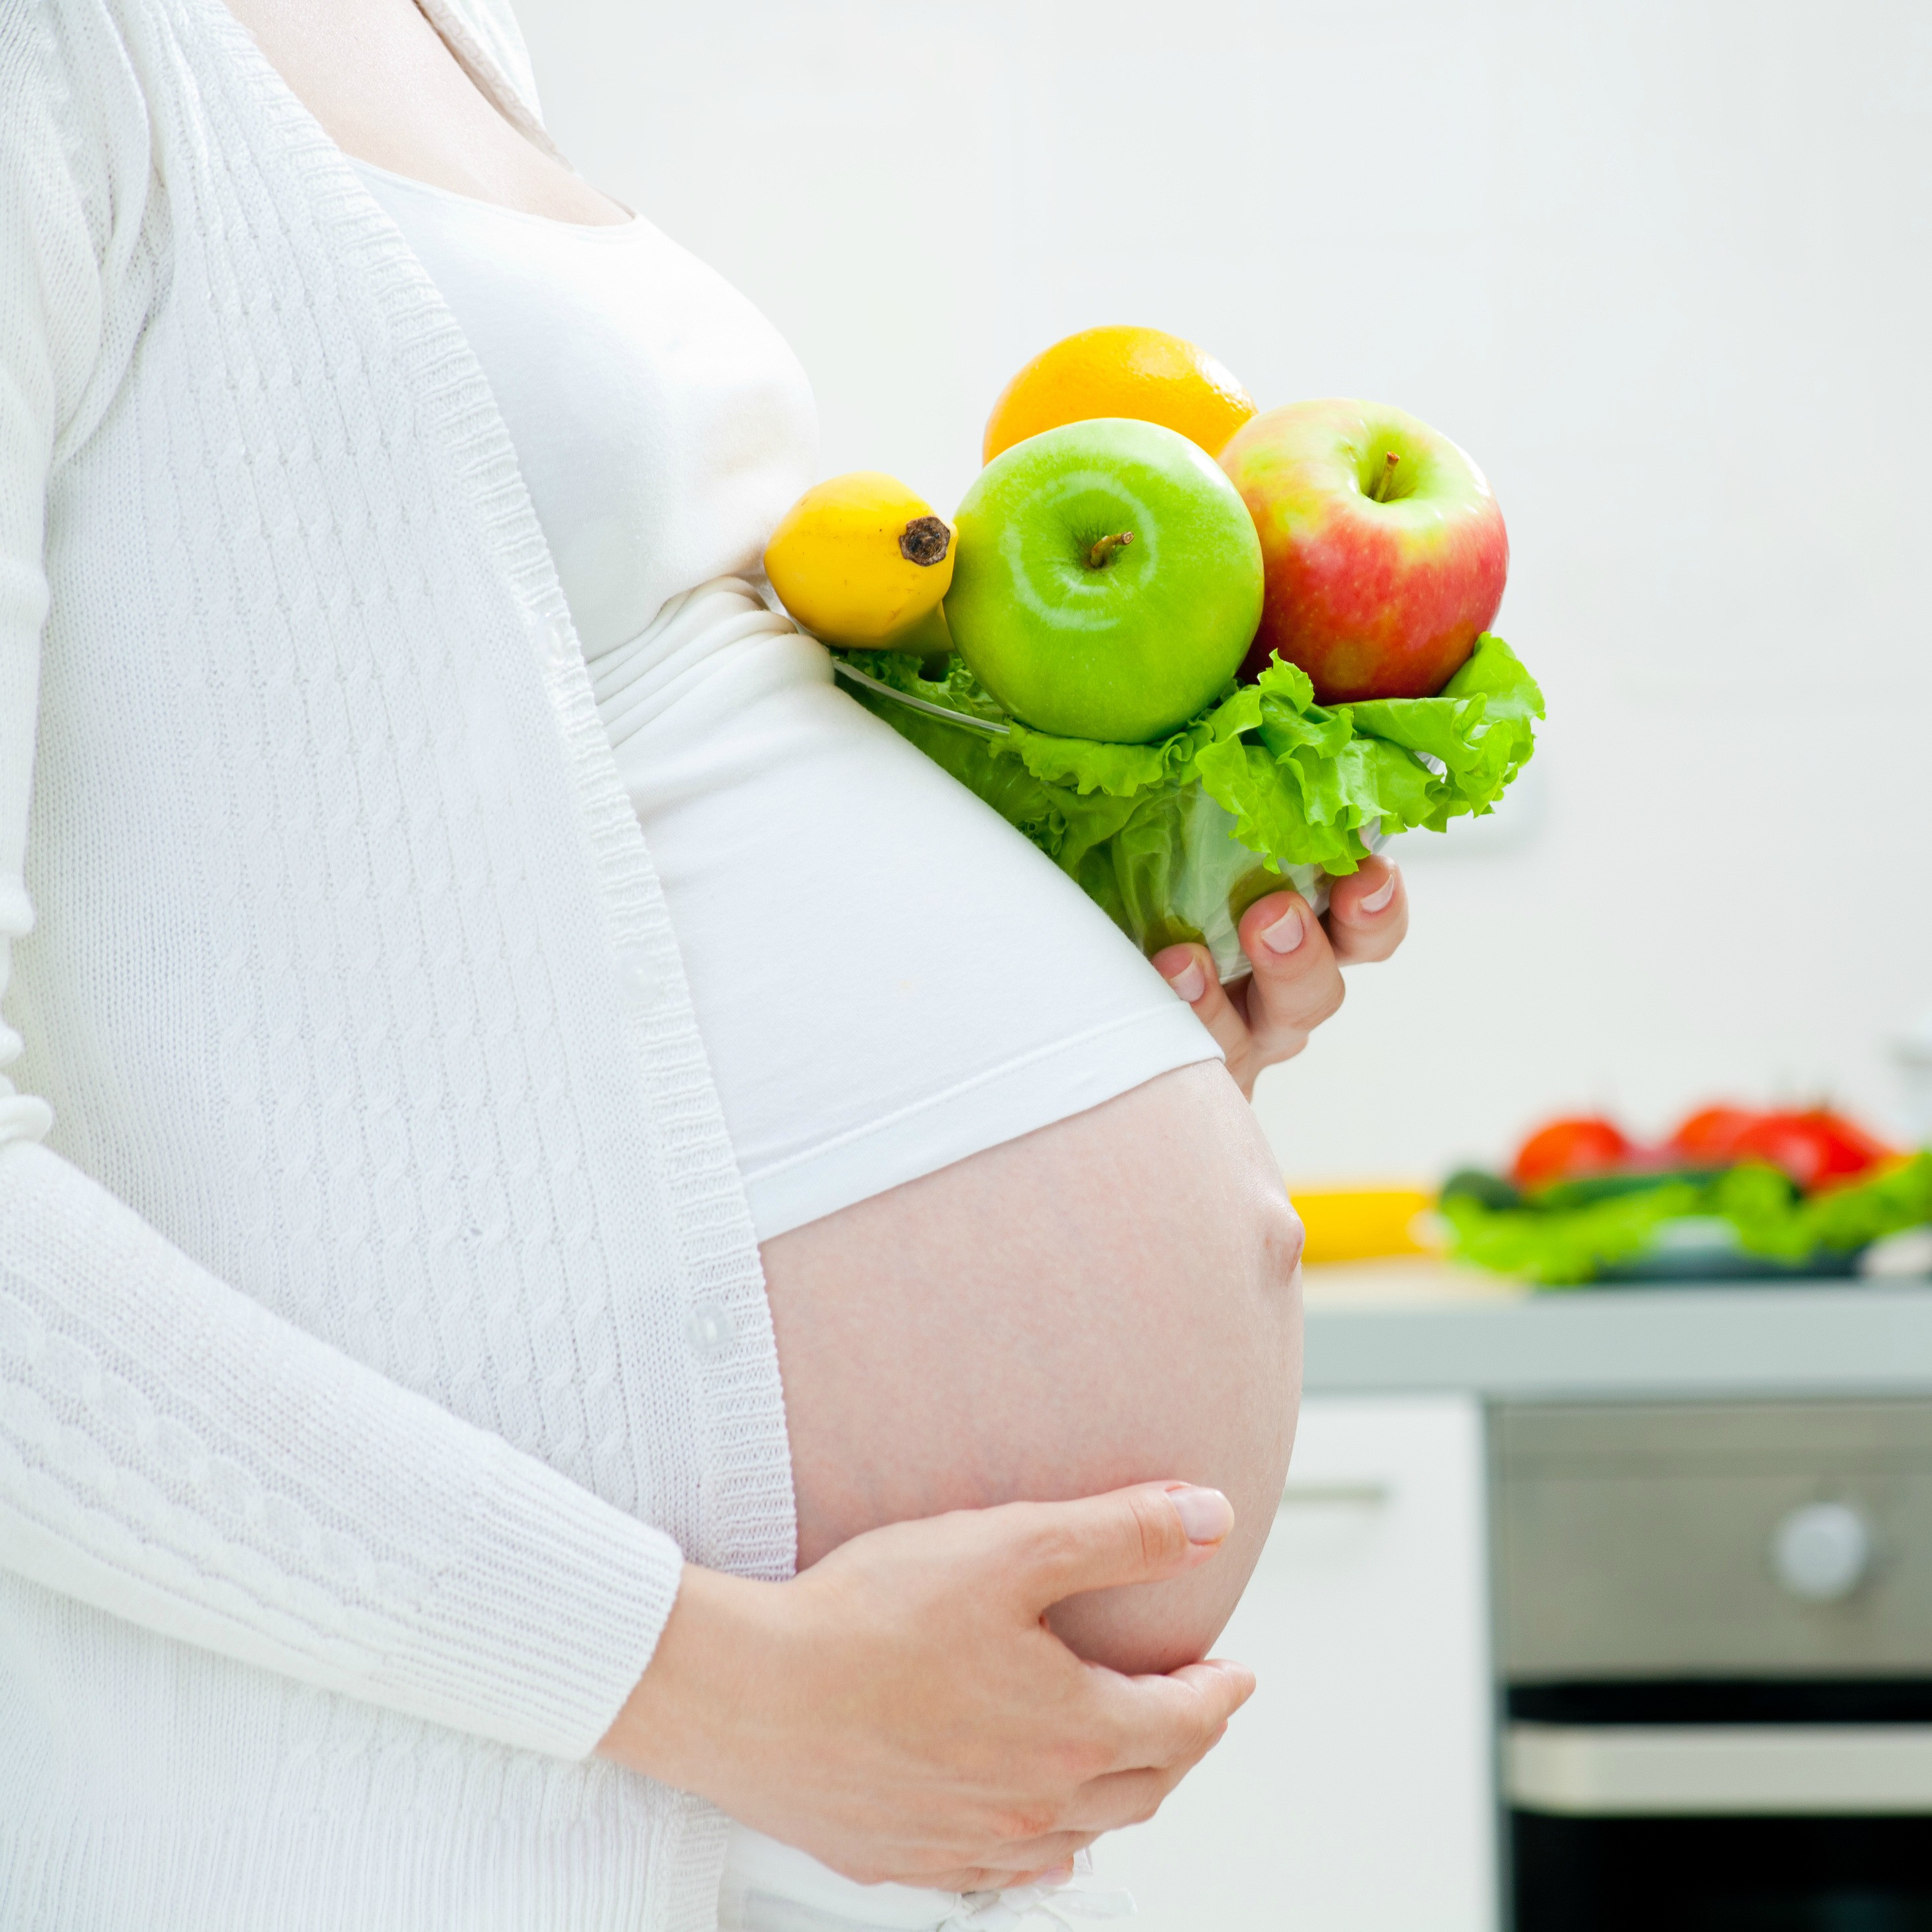 Healthy Snacks For Pregnant Women
 The Ultimate List of Healthy Pregnancy Snacks Over 50